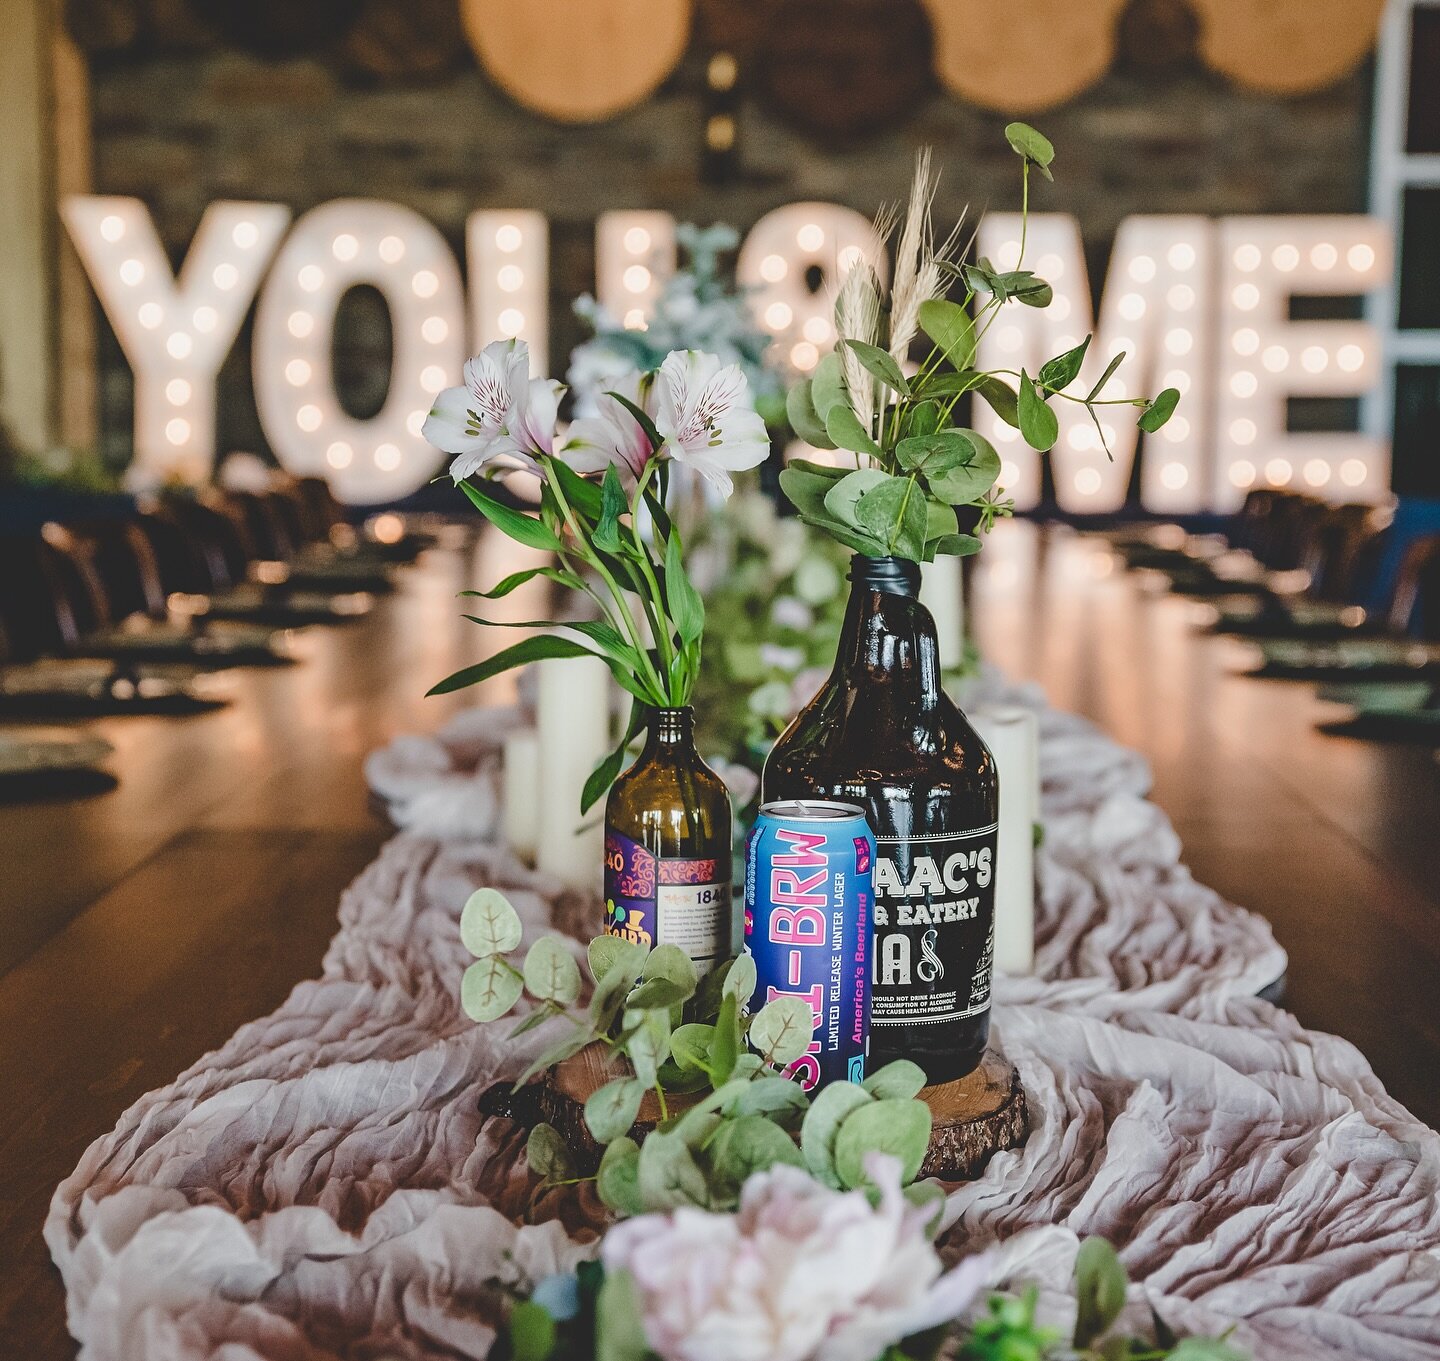 Some of the best centerpieces we&rsquo;ve seen come from collections of peoples past combined with traditional decor. As an event space within a brewery, we&rsquo;re always thrilled to see the stories of couples affinity for beers and the places they